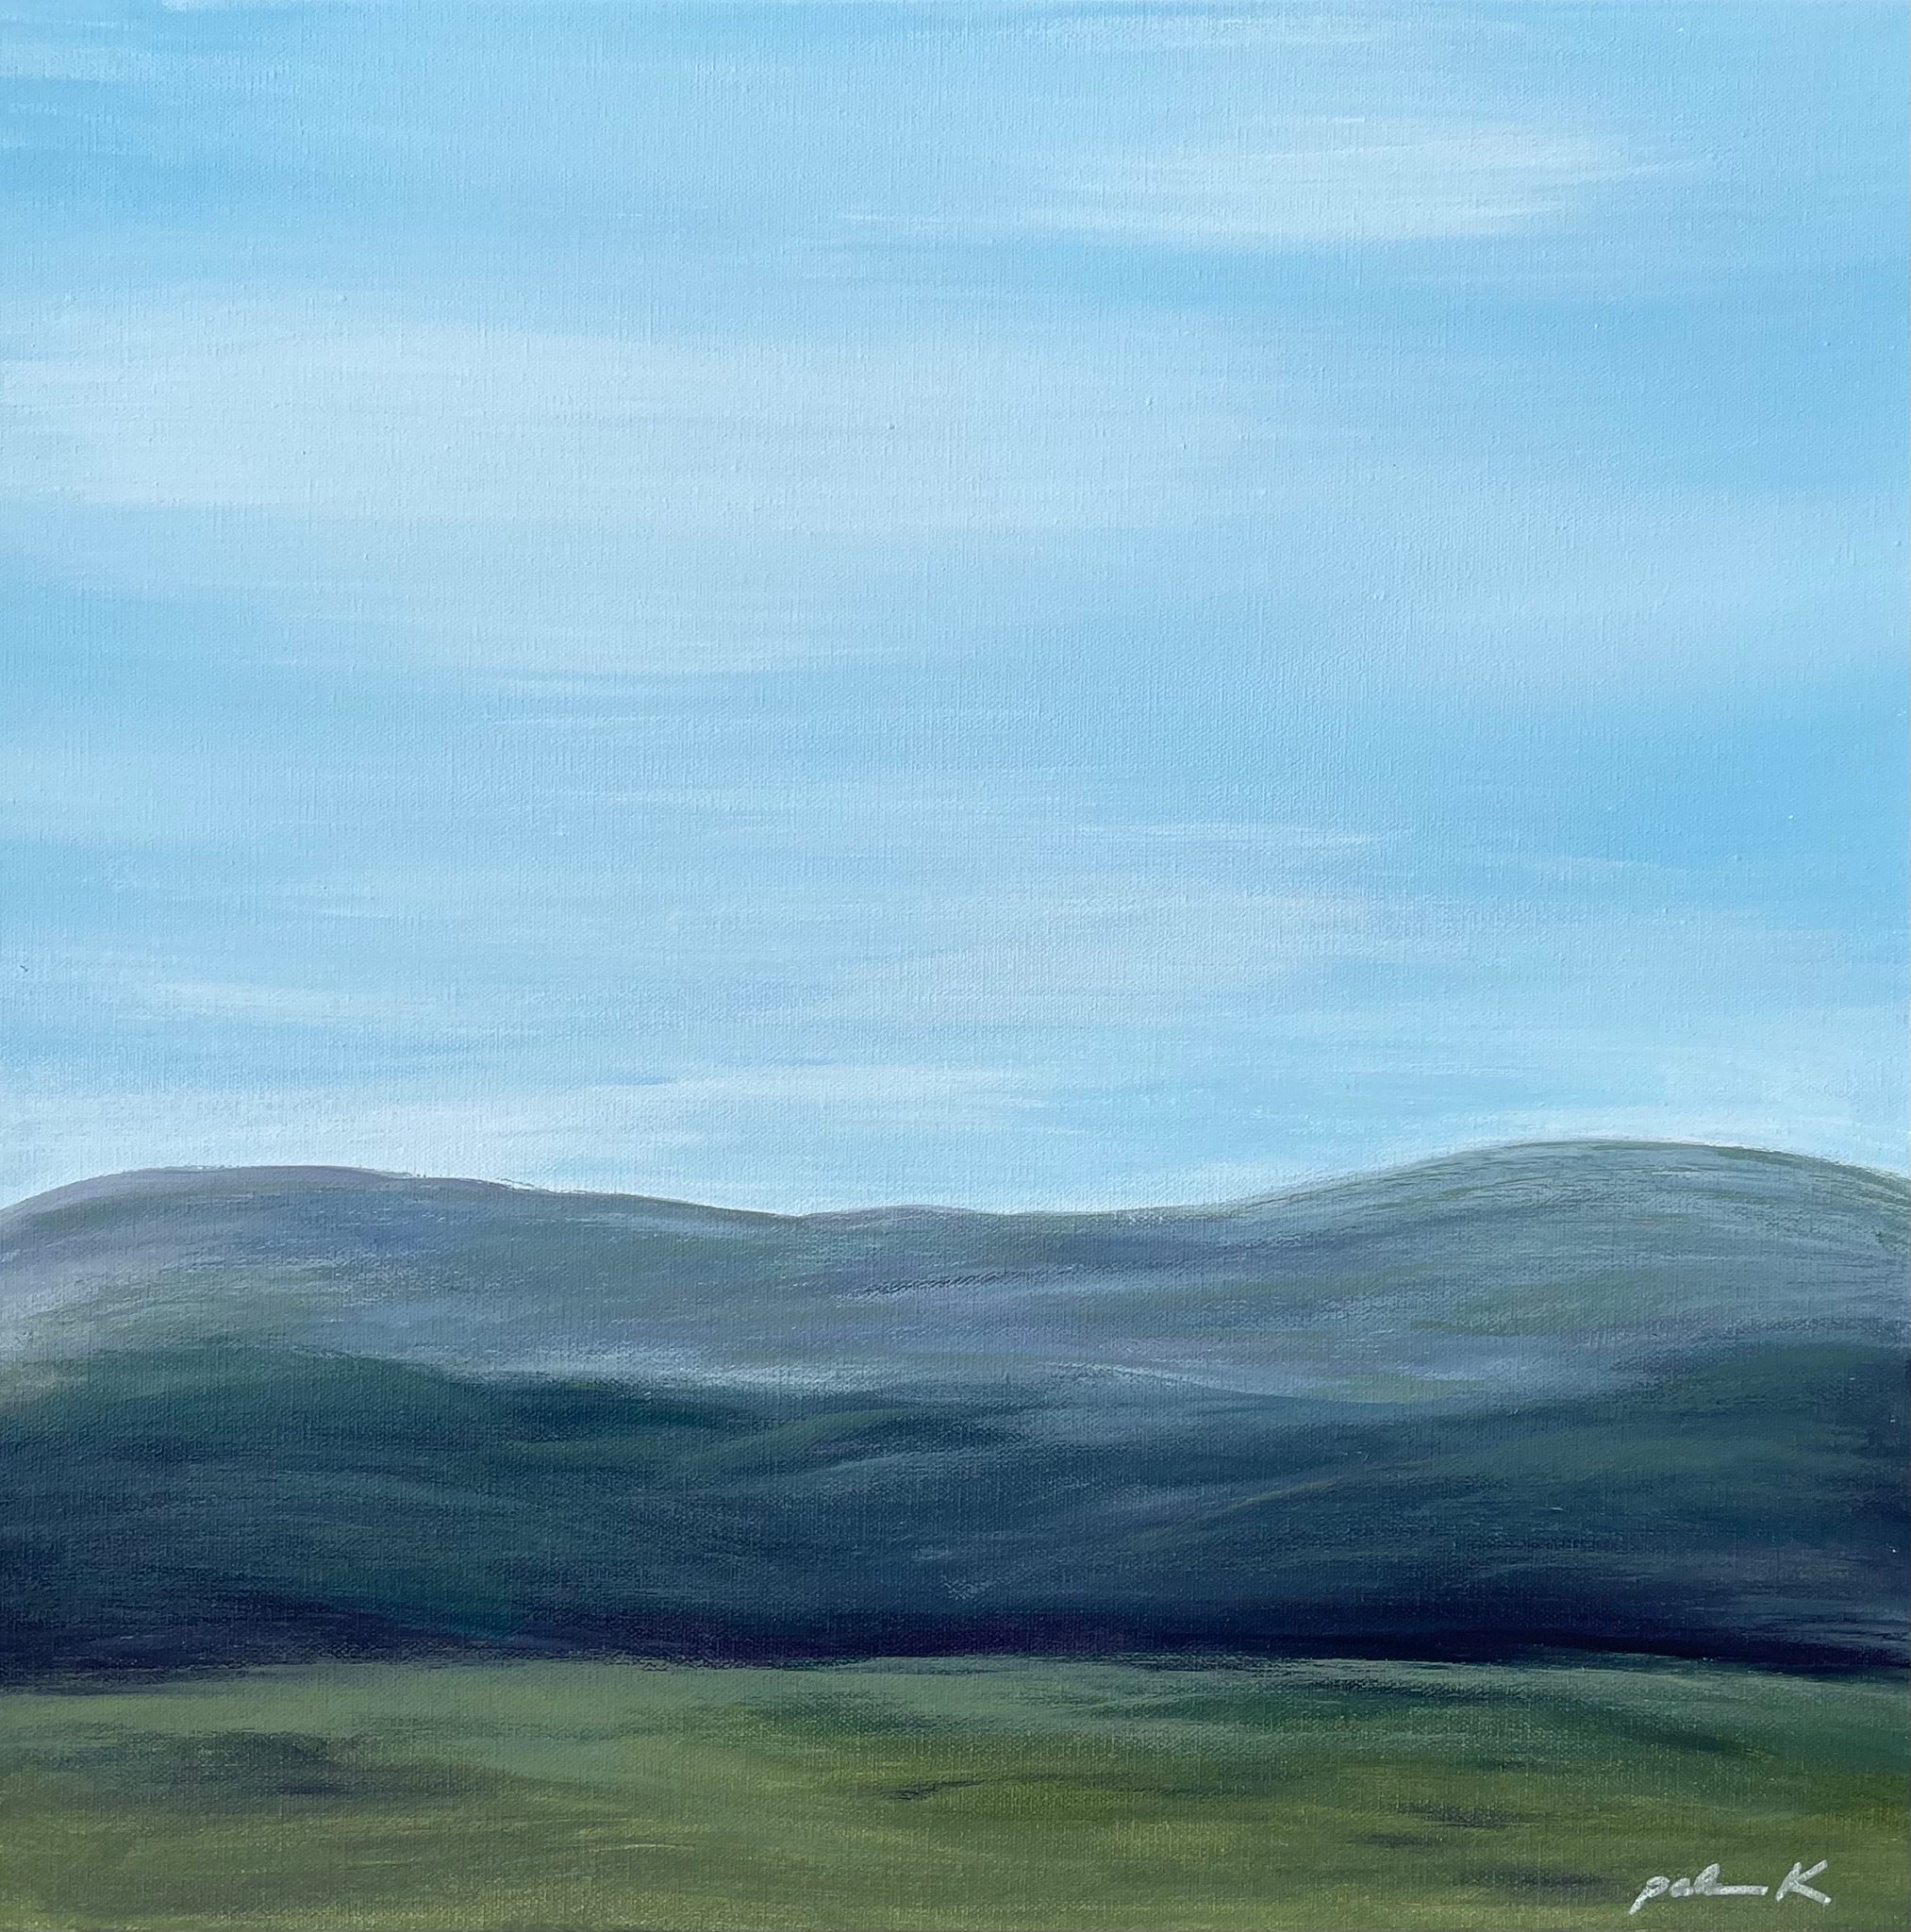 Original landscape painting by Karen Palmer  20 x 20 acrylic on 1.5" deep gallery wrapped canvas, inspired by the Blue Ridge Mountains of Virginia.  Unframed with D-rings and wire on back, ready to hang.     "Day of Rest" © Karen Palmer.  All rights reserved.